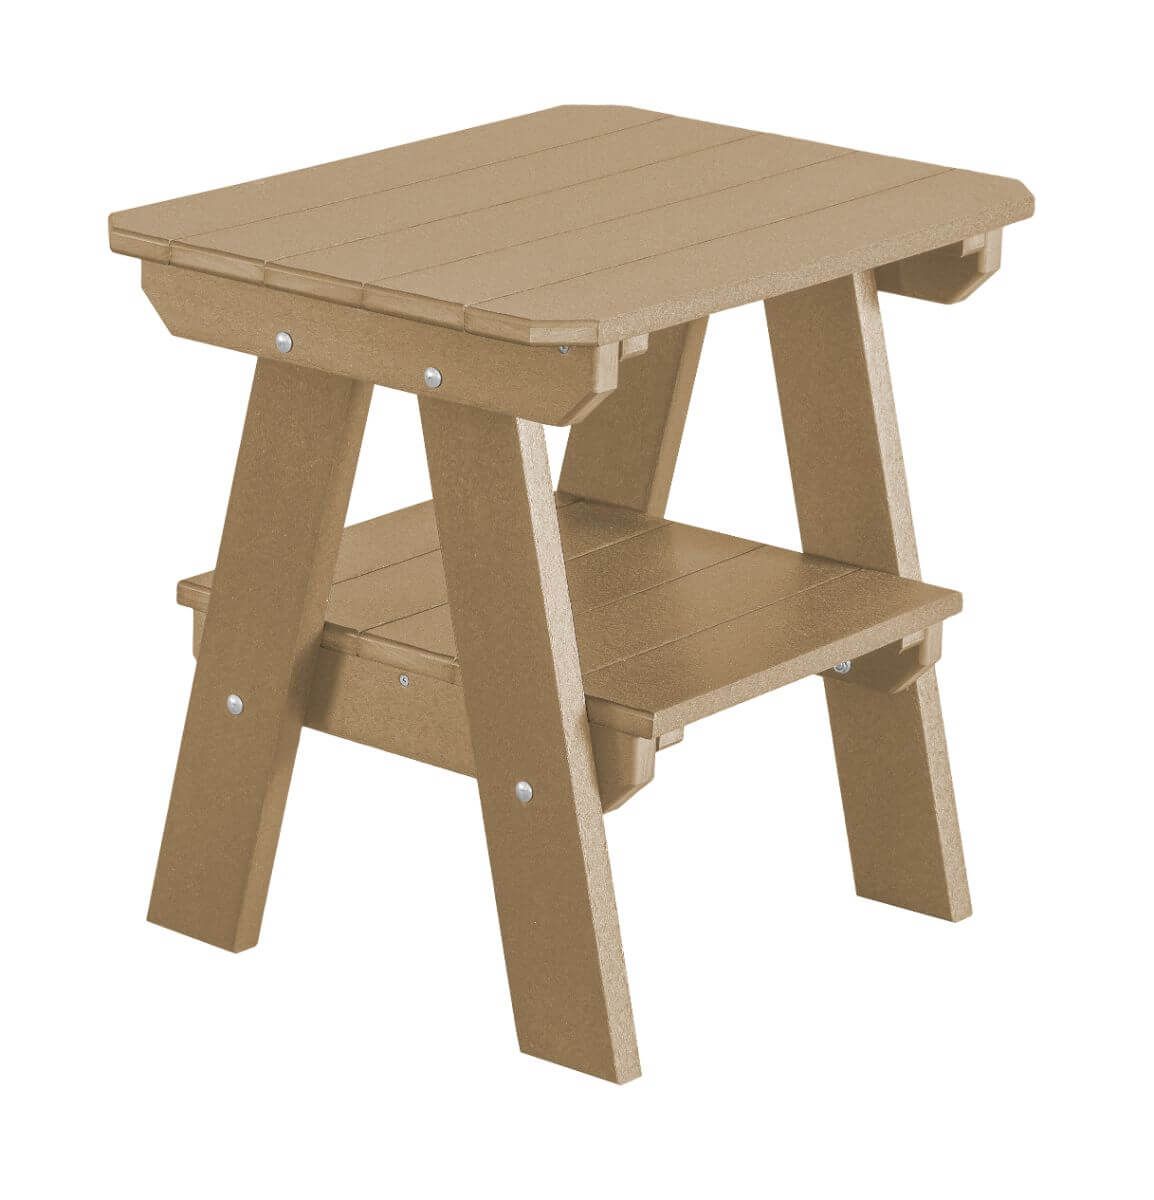 Weathered Wood Sidra Outdoor End Table